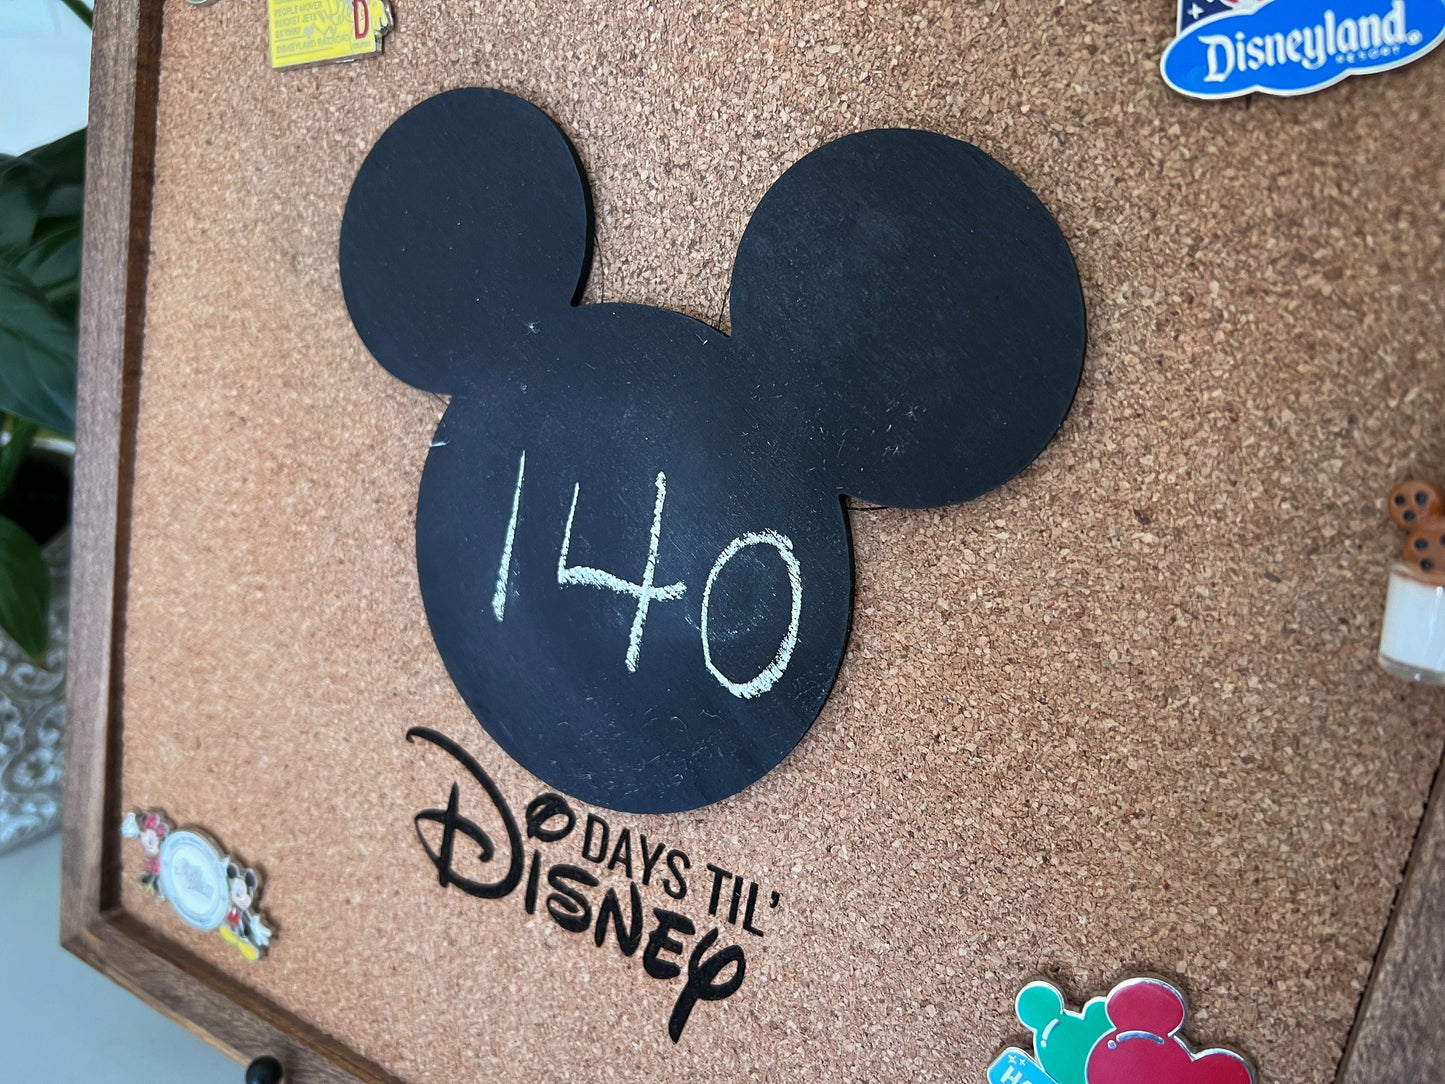 Disney Pin Trading Board & Countdown To Disney Combination | Pin Trader Board | Pin Display Board | Countdown to Disney with Stand